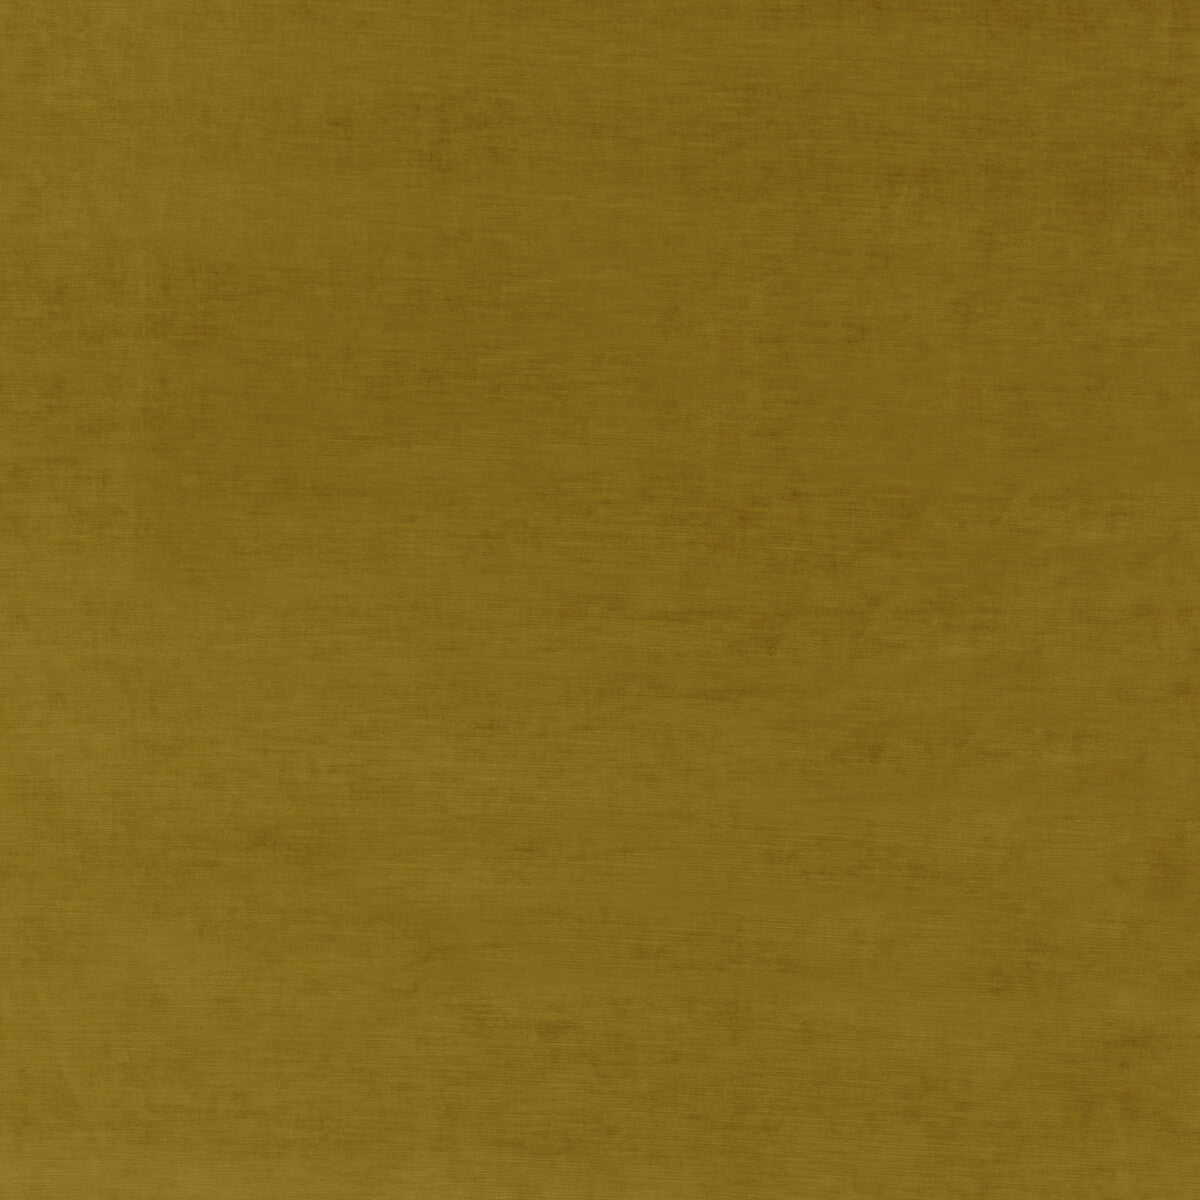 Meridian Velvet fabric in mustard color - pattern ED85292.825.0 - by Threads in the Meridian collection